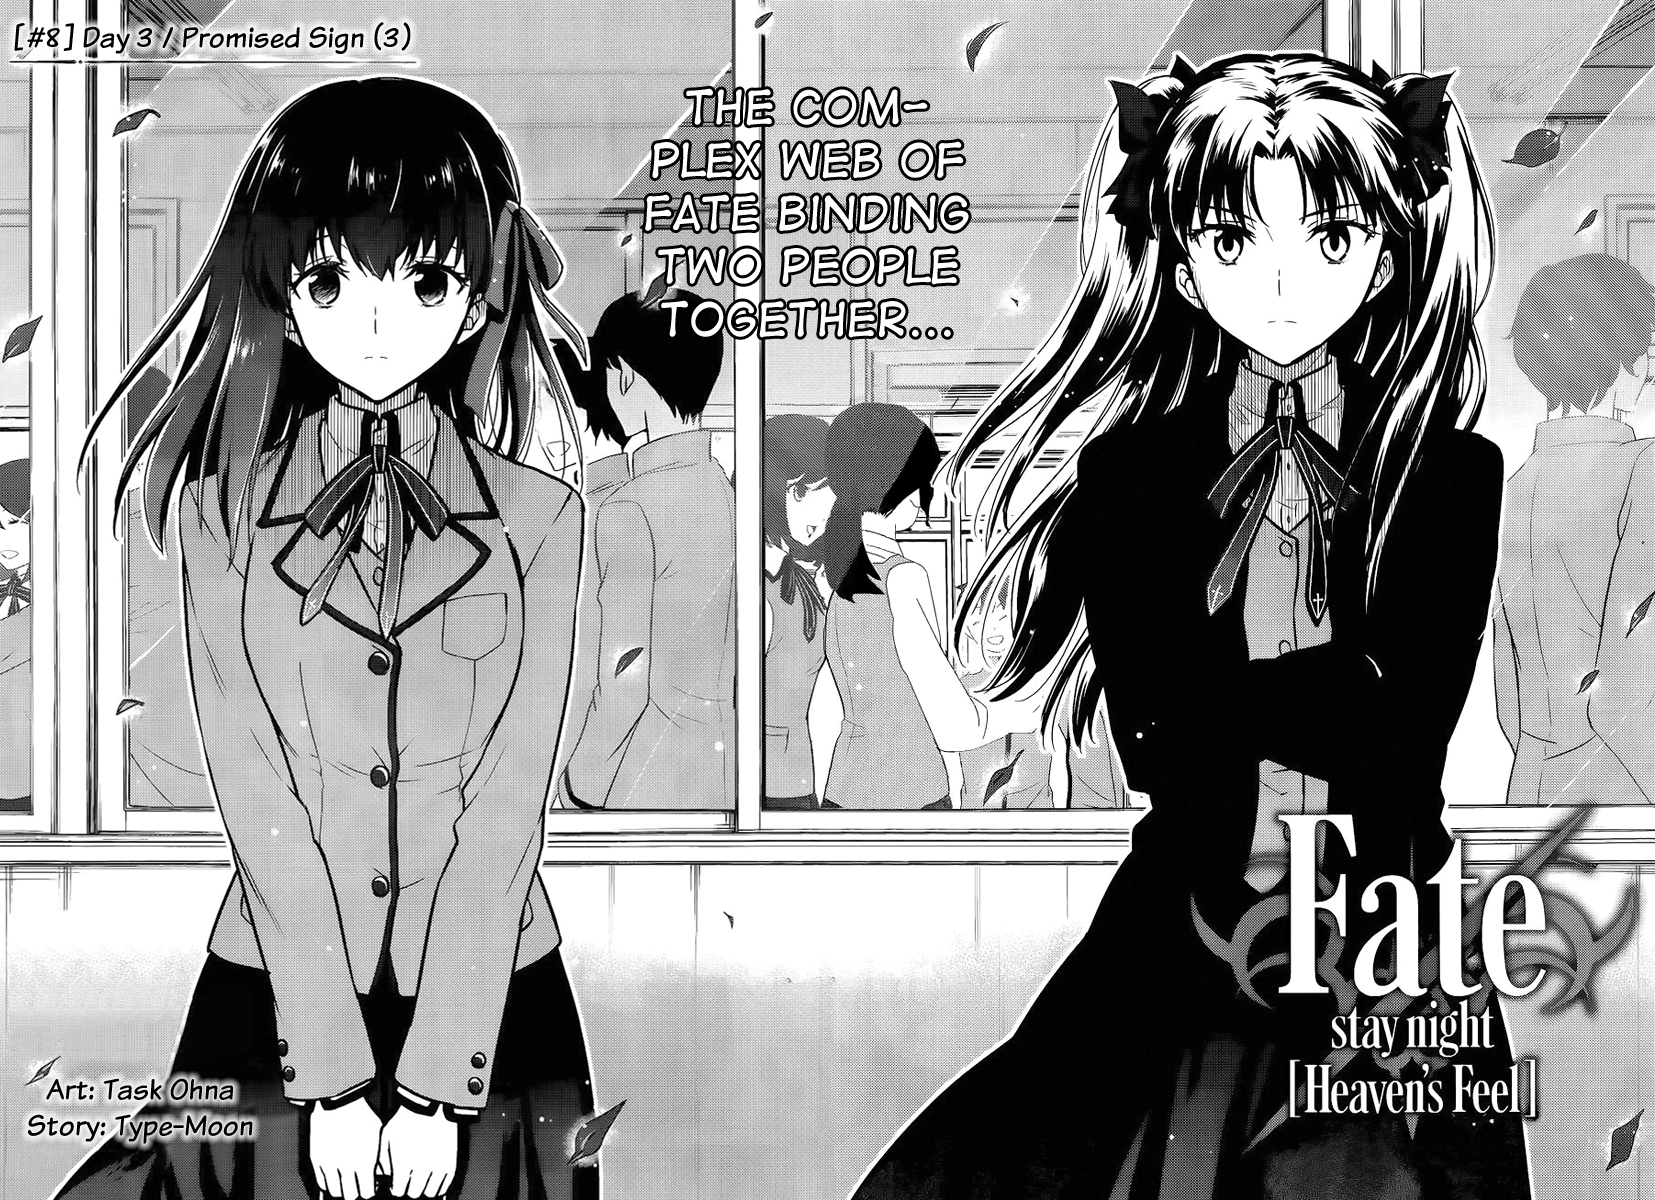 Fate/stay Night - Heaven's Feel Vol.0 Chapter 8: Day 3 / Promised Sign (3) - Picture 3